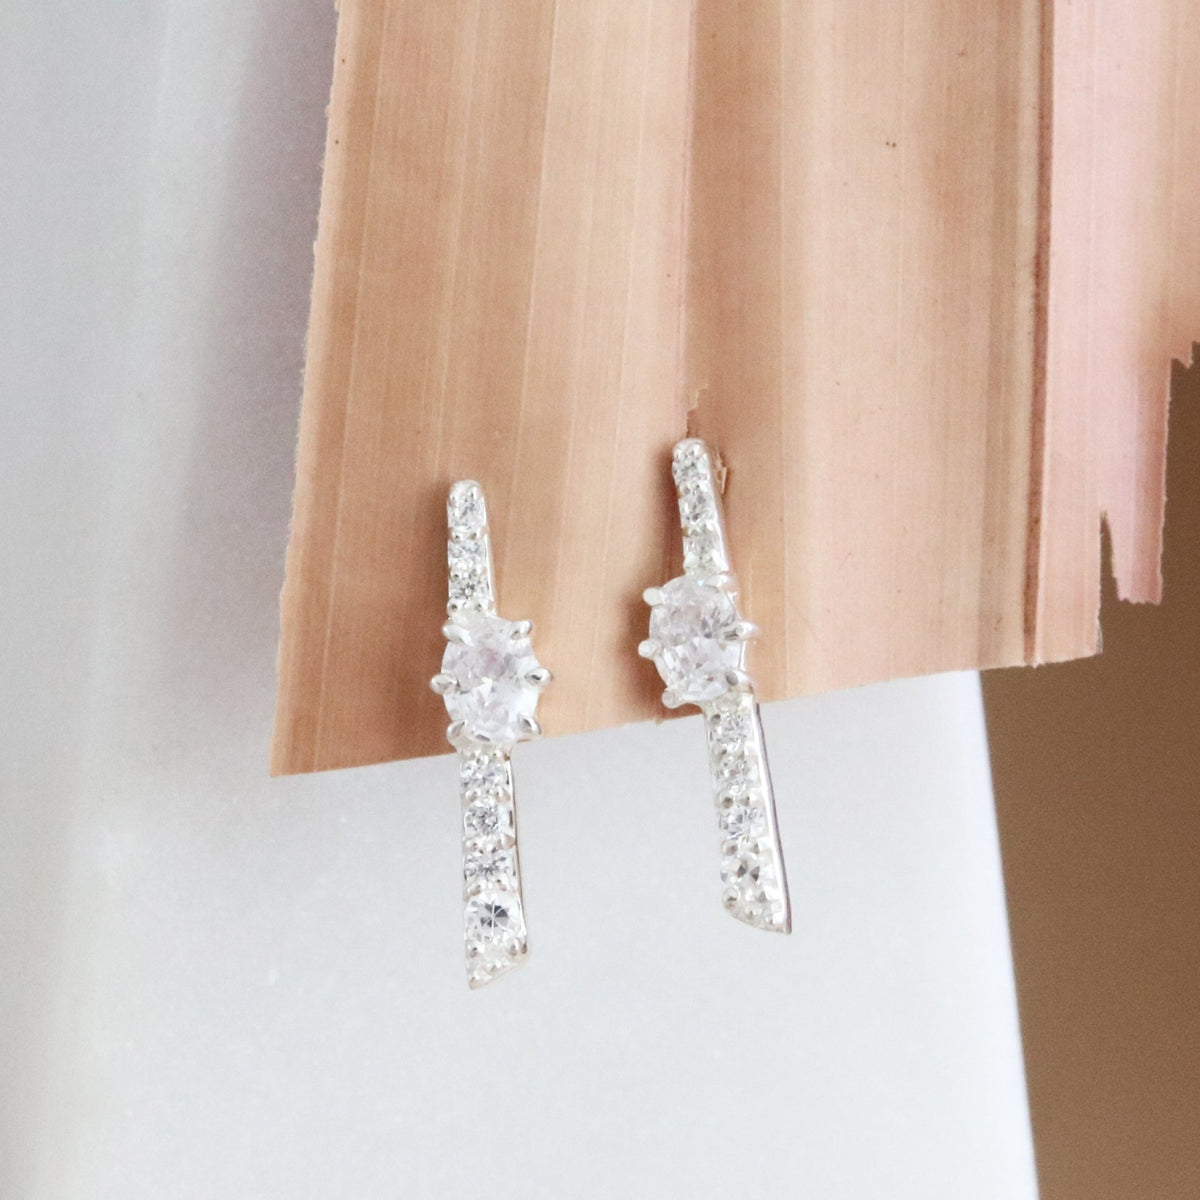 DAINTY KIND OVAL BAR STUDS - CUBIC ZIRCONIA &amp; SILVER - SO PRETTY CARA COTTER